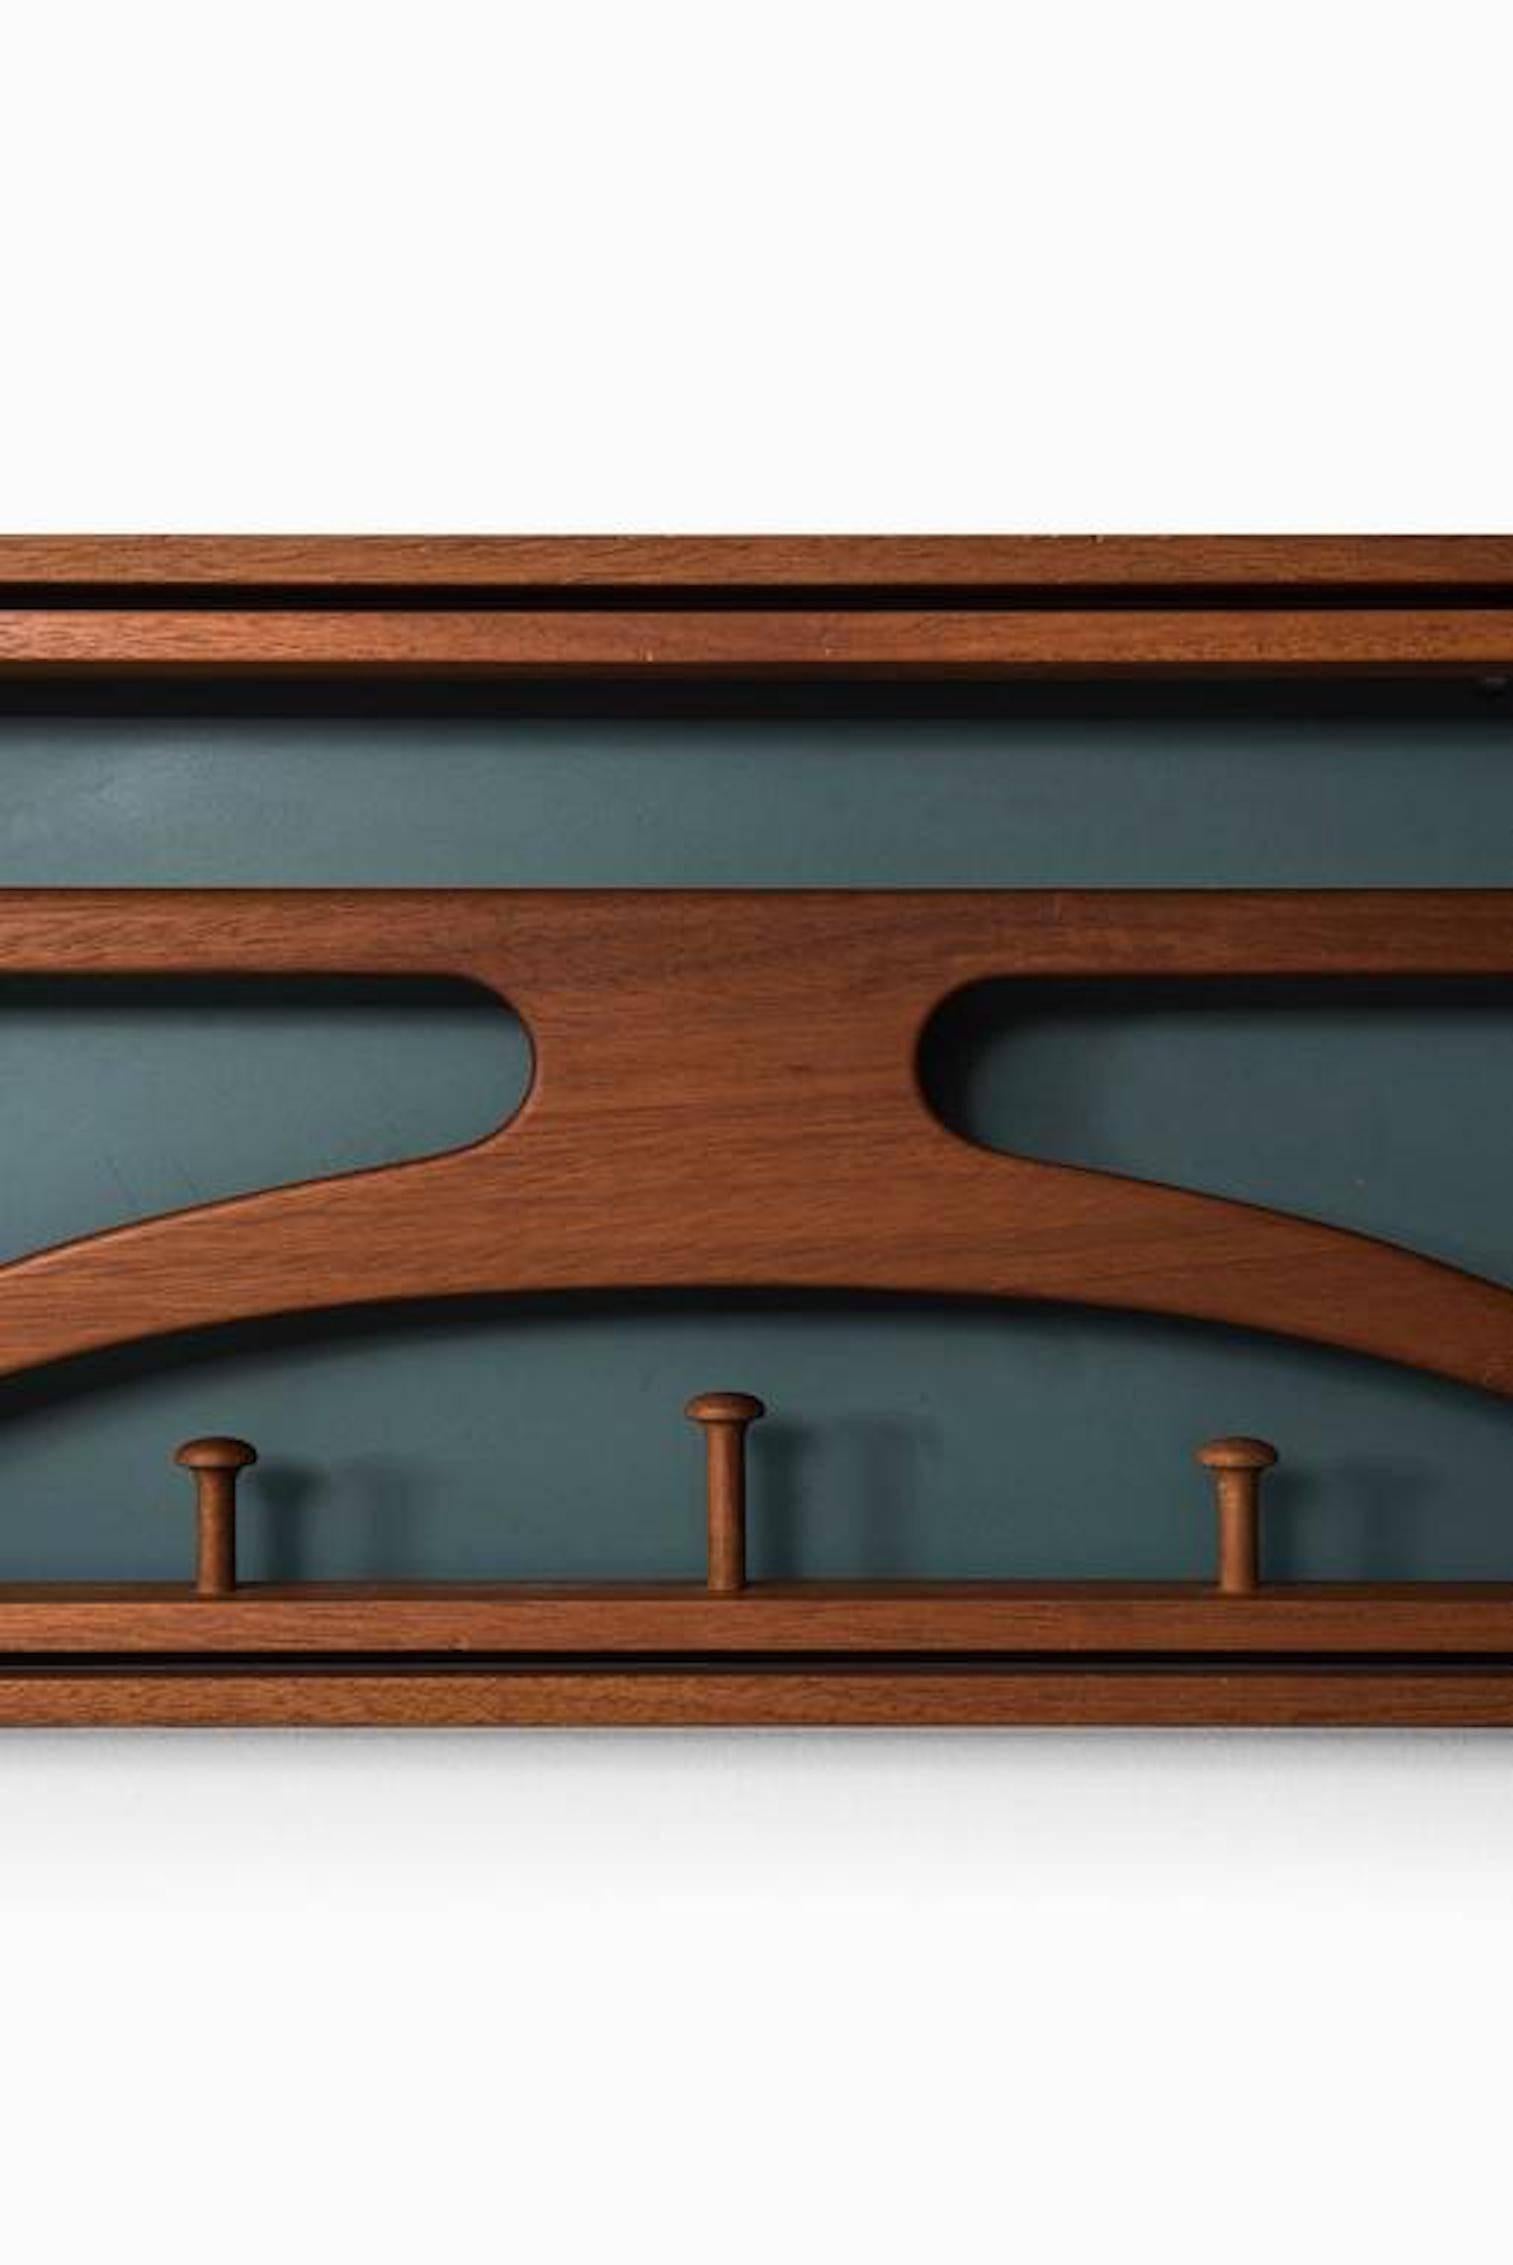 Scandinavian teak wall valet by Adam Hoff and Poul Østergaard.
Valet by Adam Hoff and Poul Østergaard for Virum Möbelsnedkeri.
Made of teak wood with natural leather straps and dark green formica back.
Excellent condition.
Dimensions: Closed